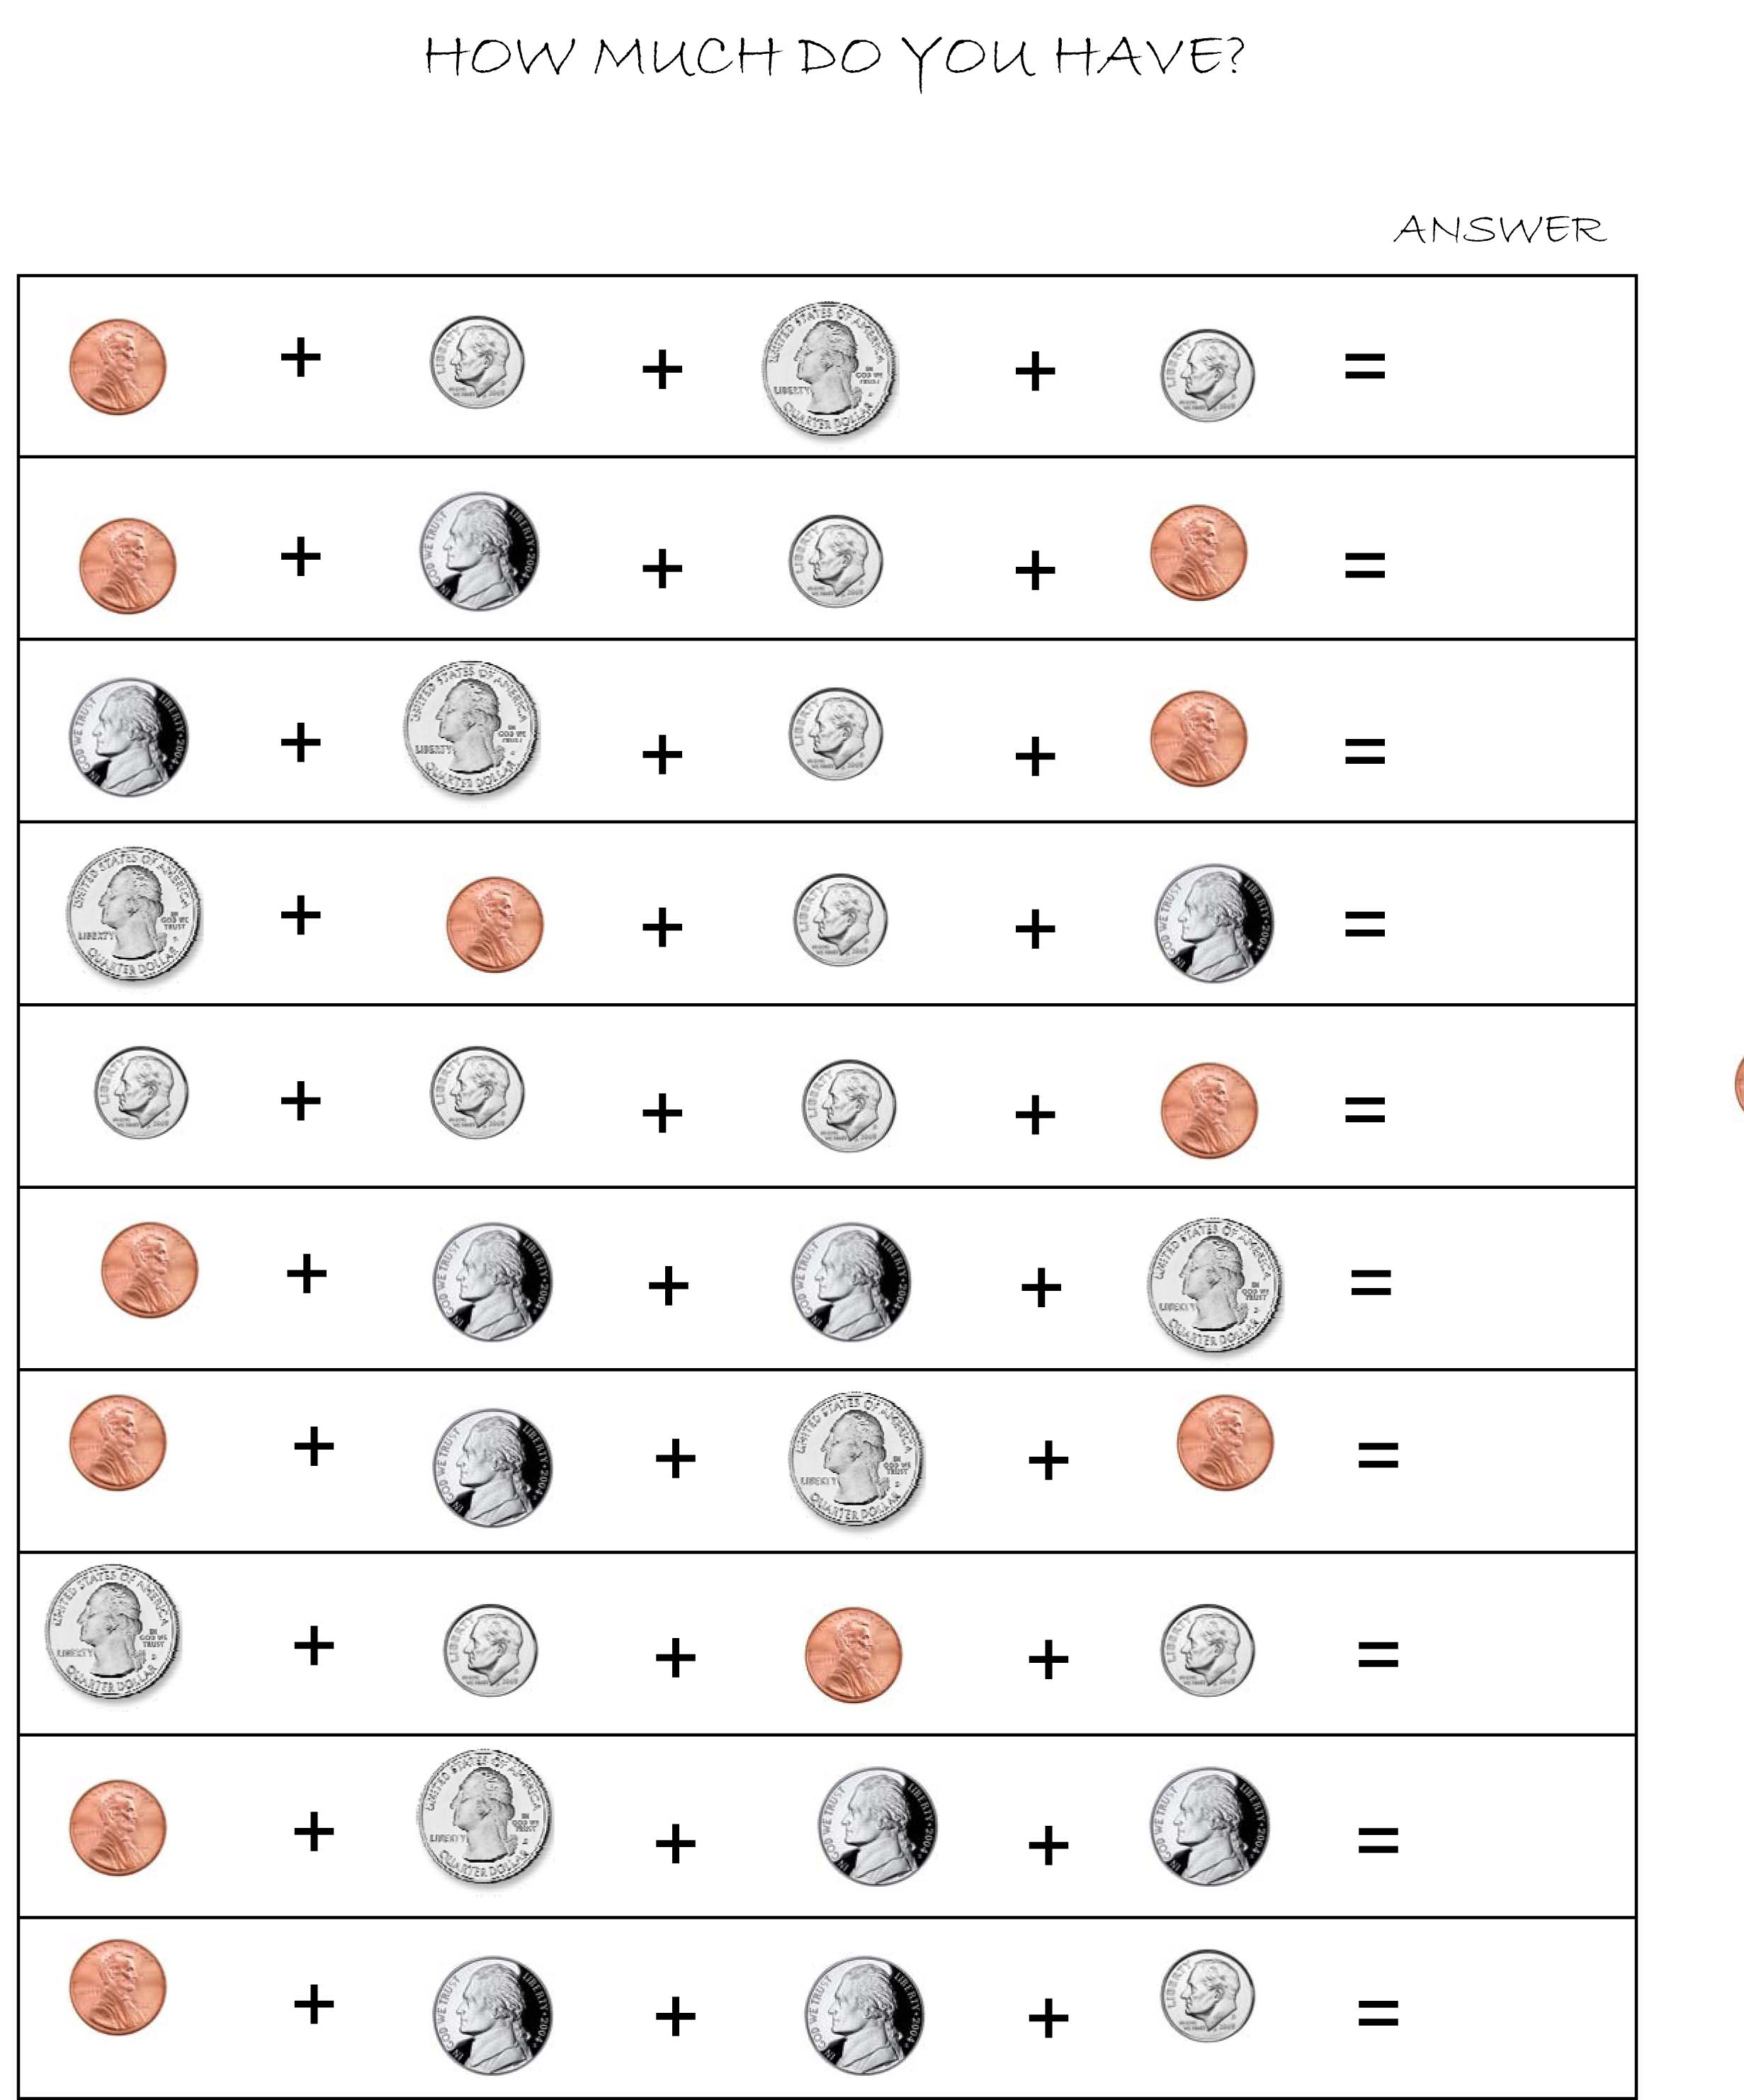 Values Of Coins Worksheet